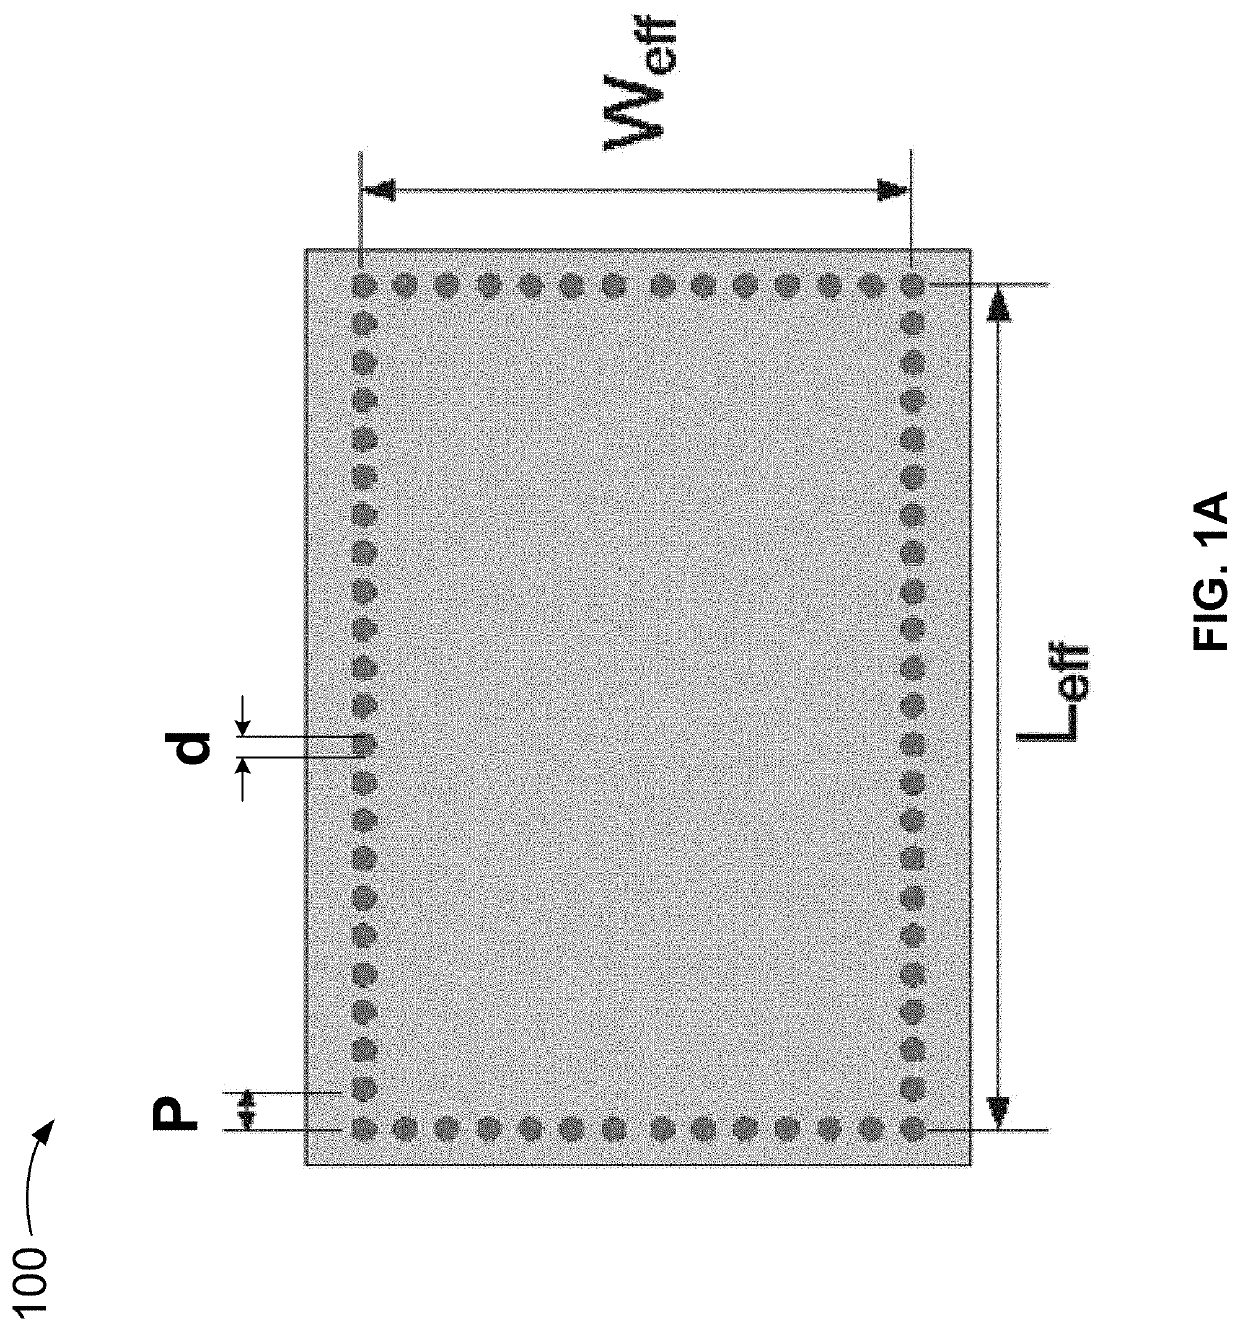 Substrate-integrated waveguide filtering crossover having a dual mode rectangular cavity coupled to eight single mode square cavities